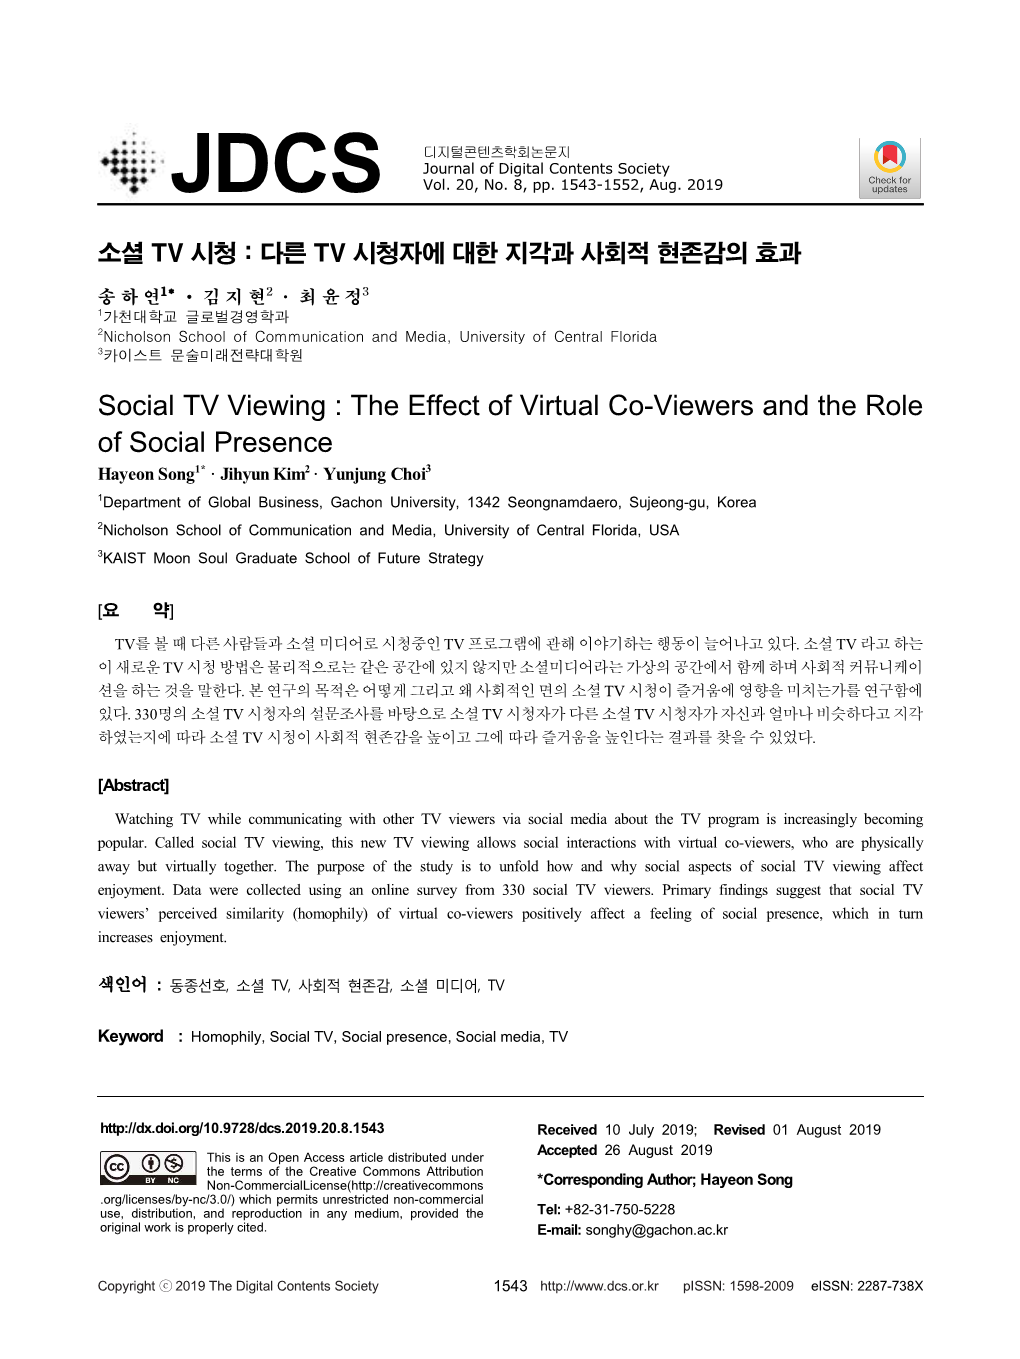 The Effect of Virtual Co-Viewers and the Role of Social Presence